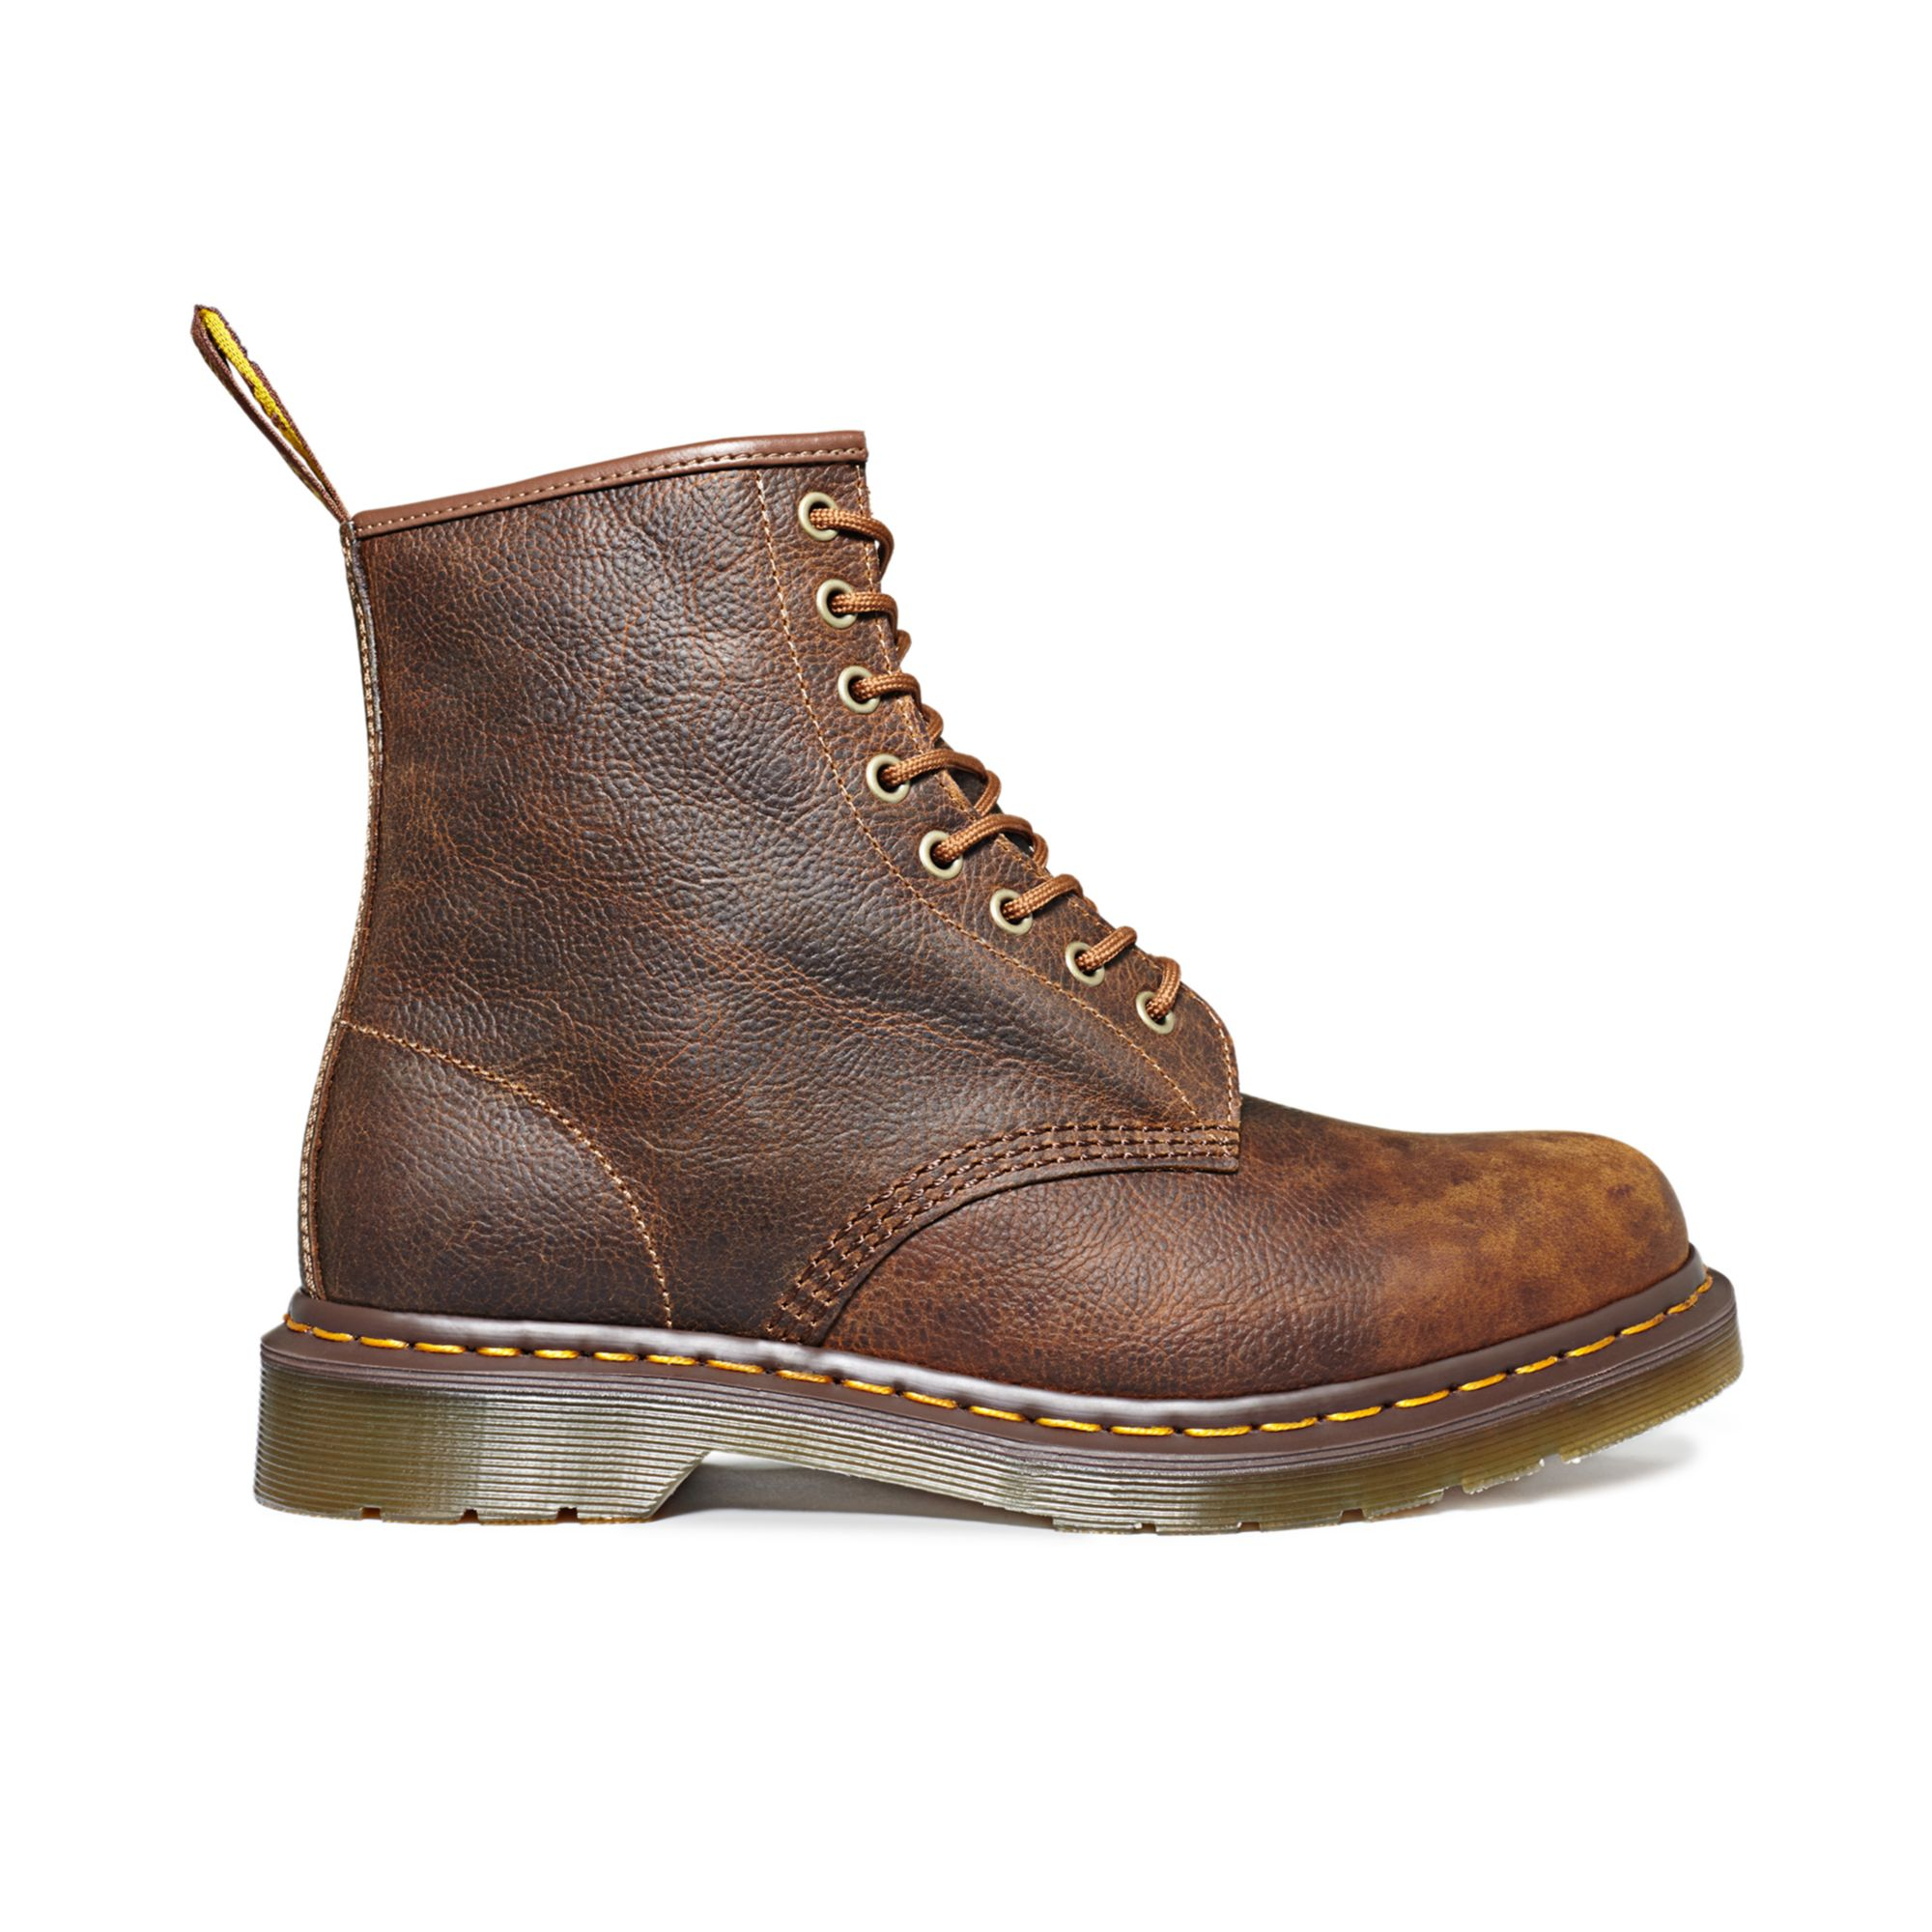 Dr. Martens Unrestricted Boots in Brown for Men - Lyst